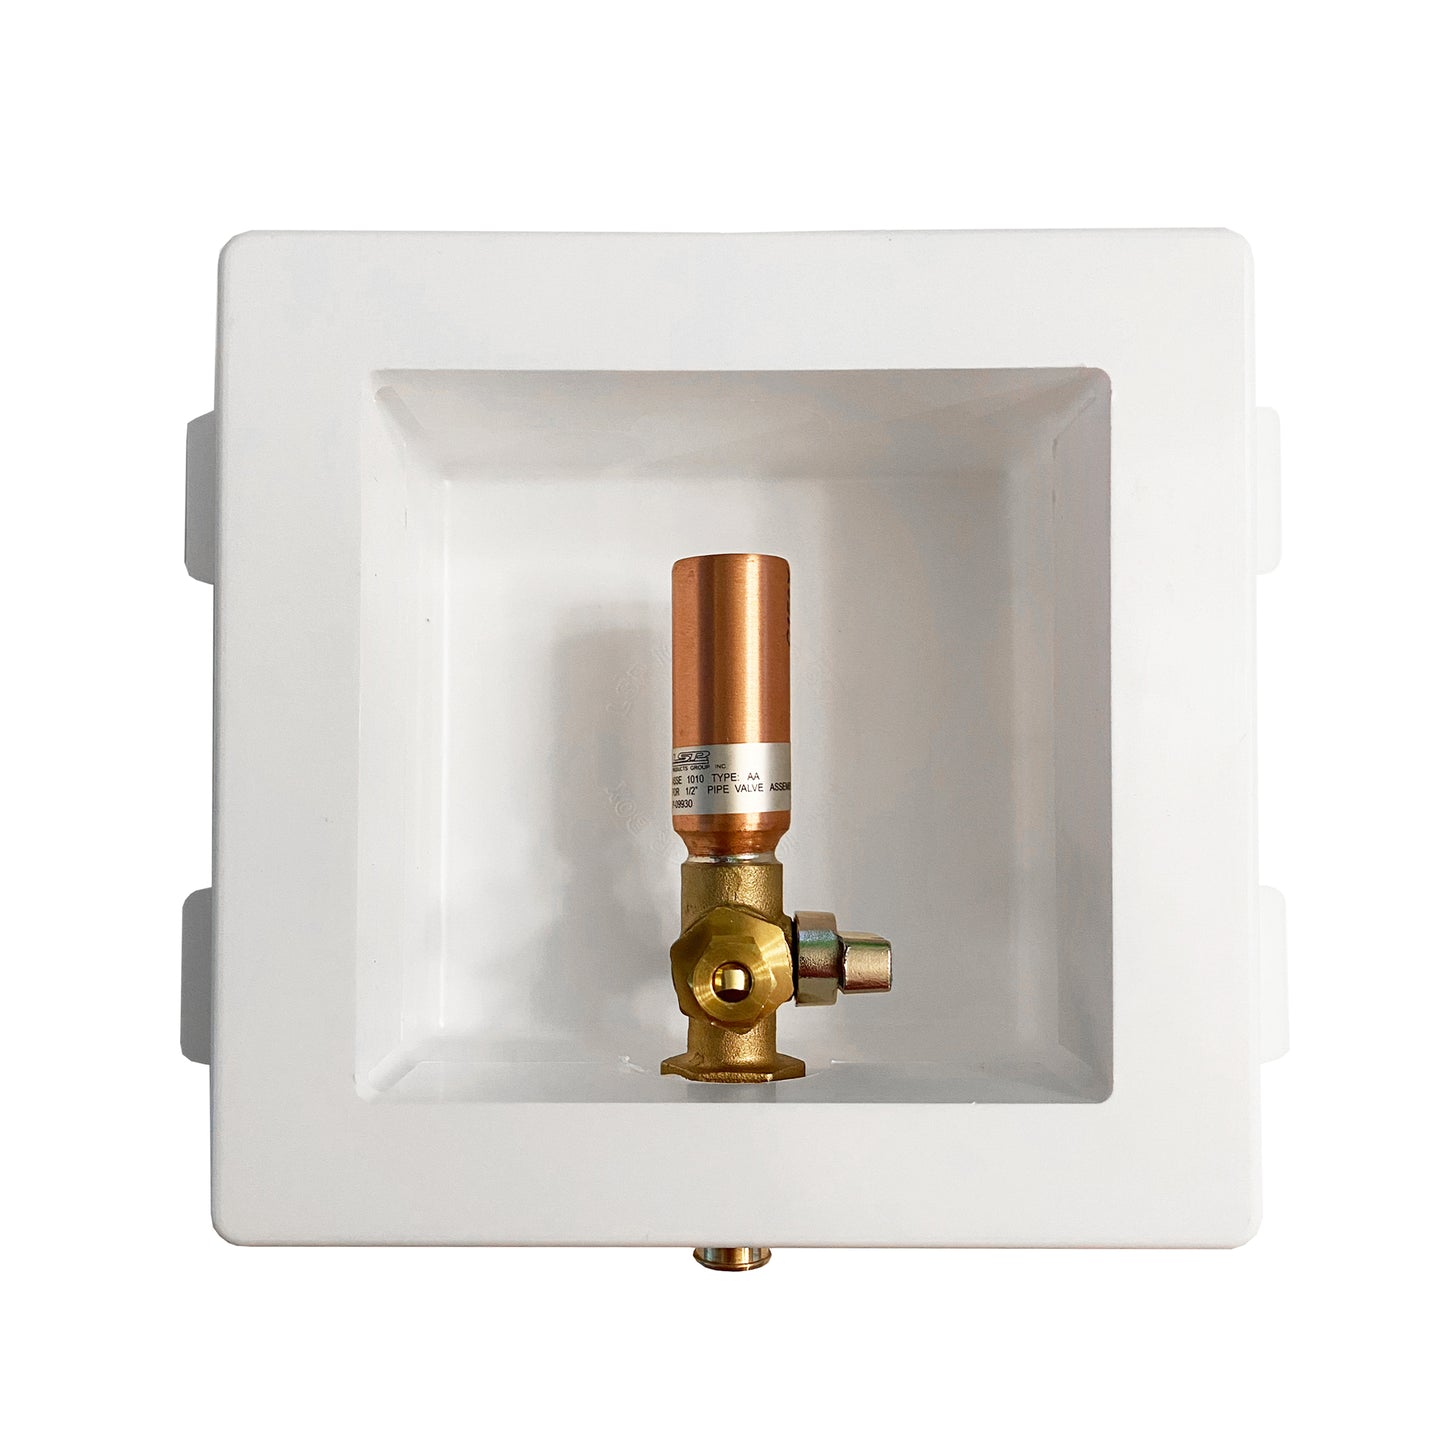 OB-824-LL - Plastic Ice Maker Outlet Box with Hammer Arrestor - 1/2" Uponor ProPex x 1/4" Compression